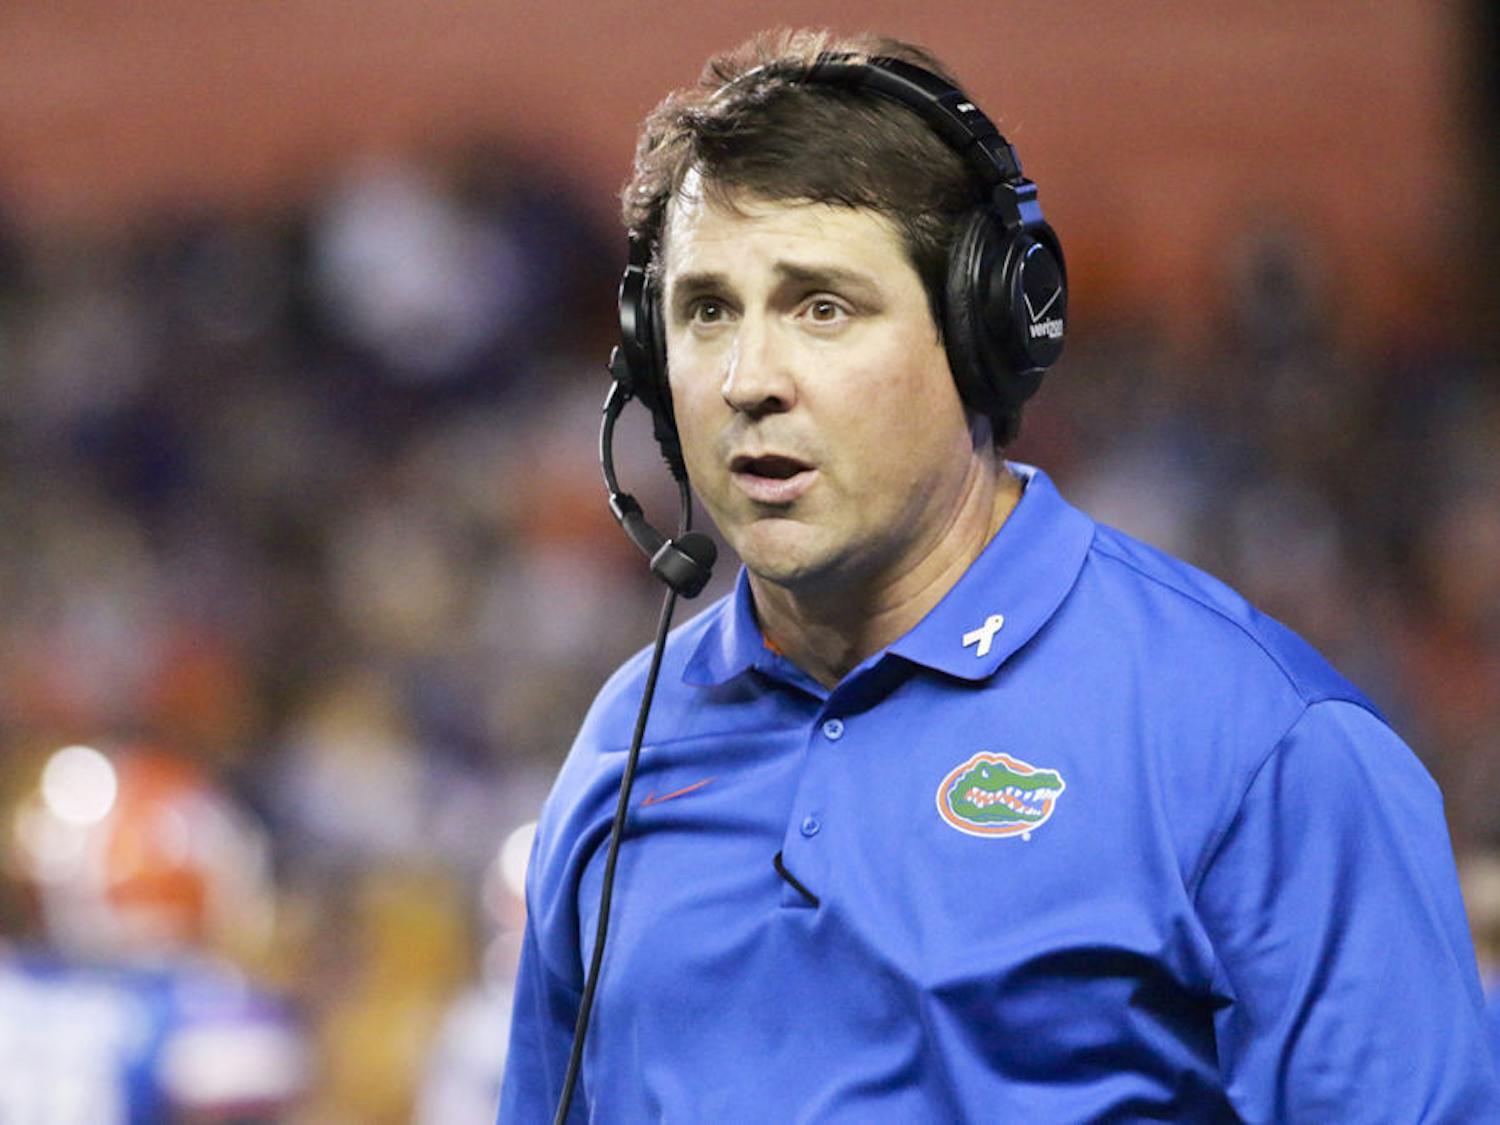 Will Muschamp looks down the field during Florida's 30-27 loss to LSU on Saturday at Ben Hill Griffin Stadium.